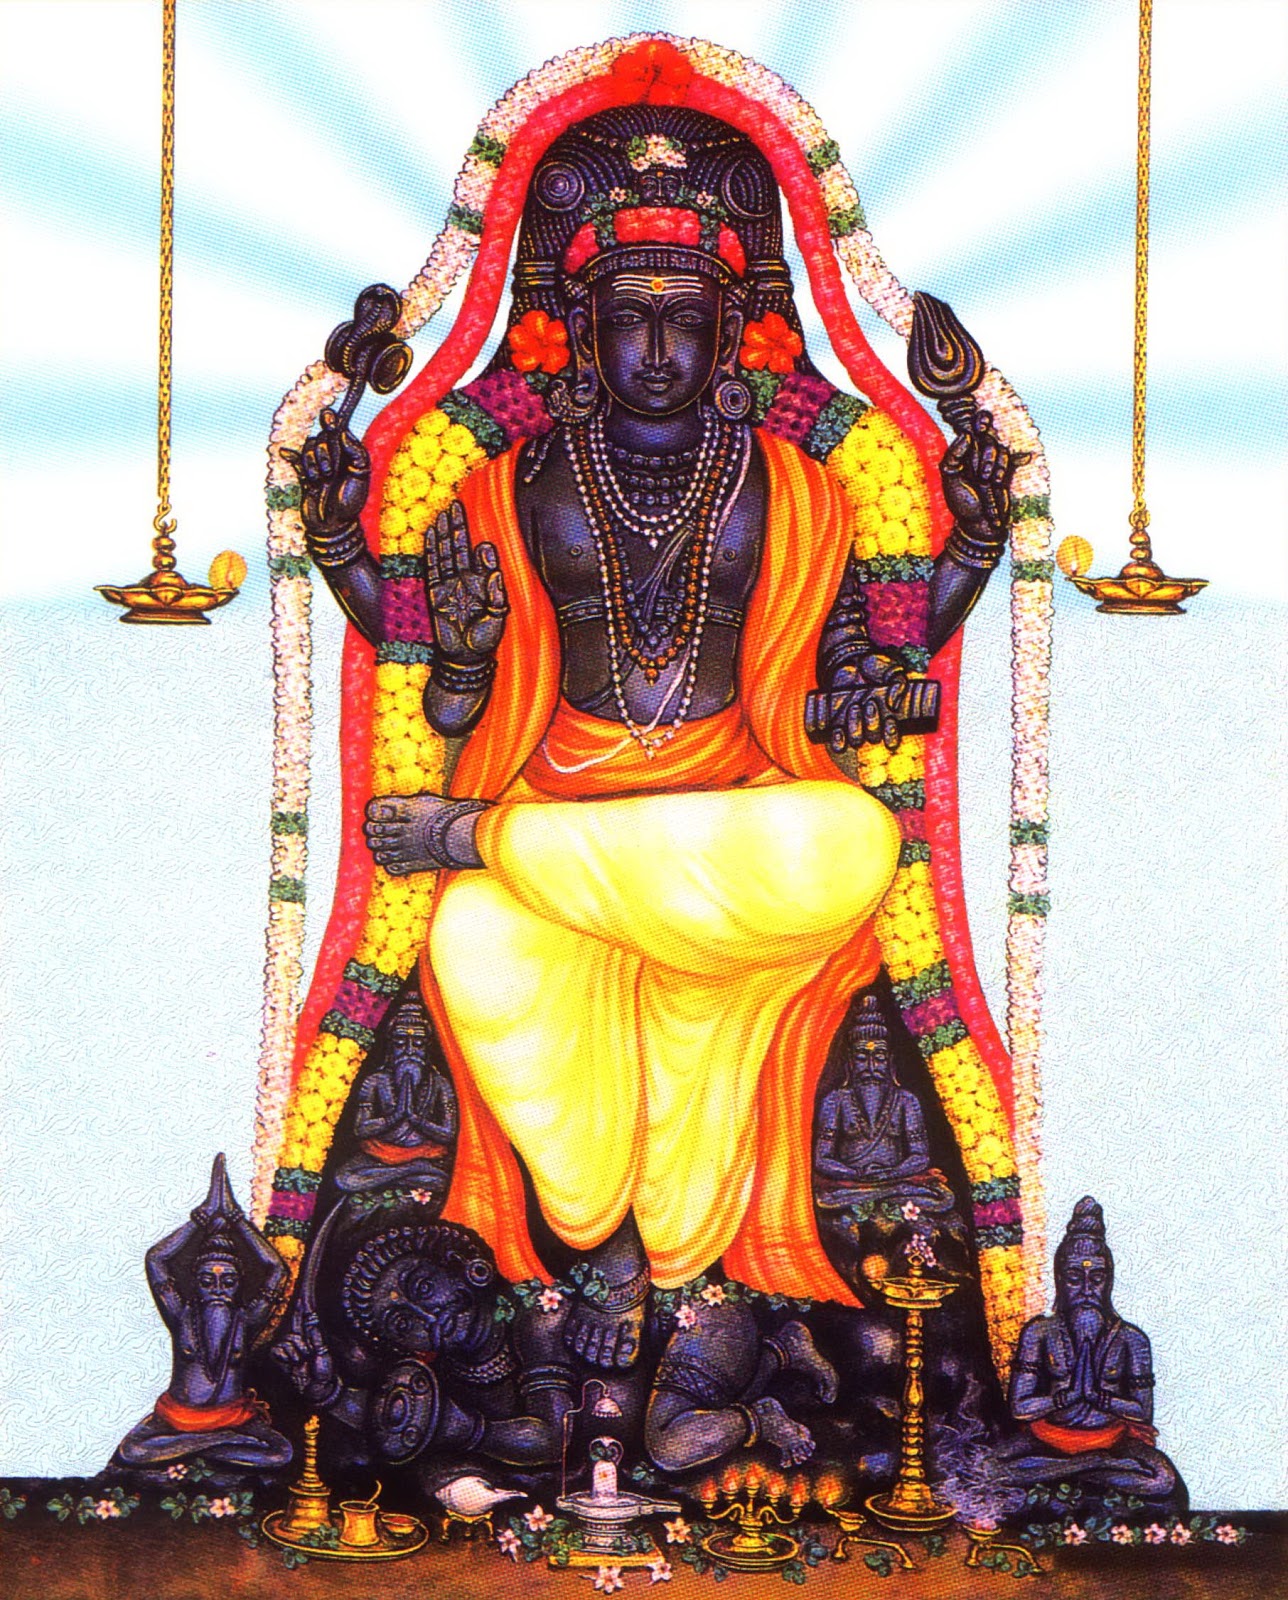 Pictures of Lord Dakshinamurthy. 